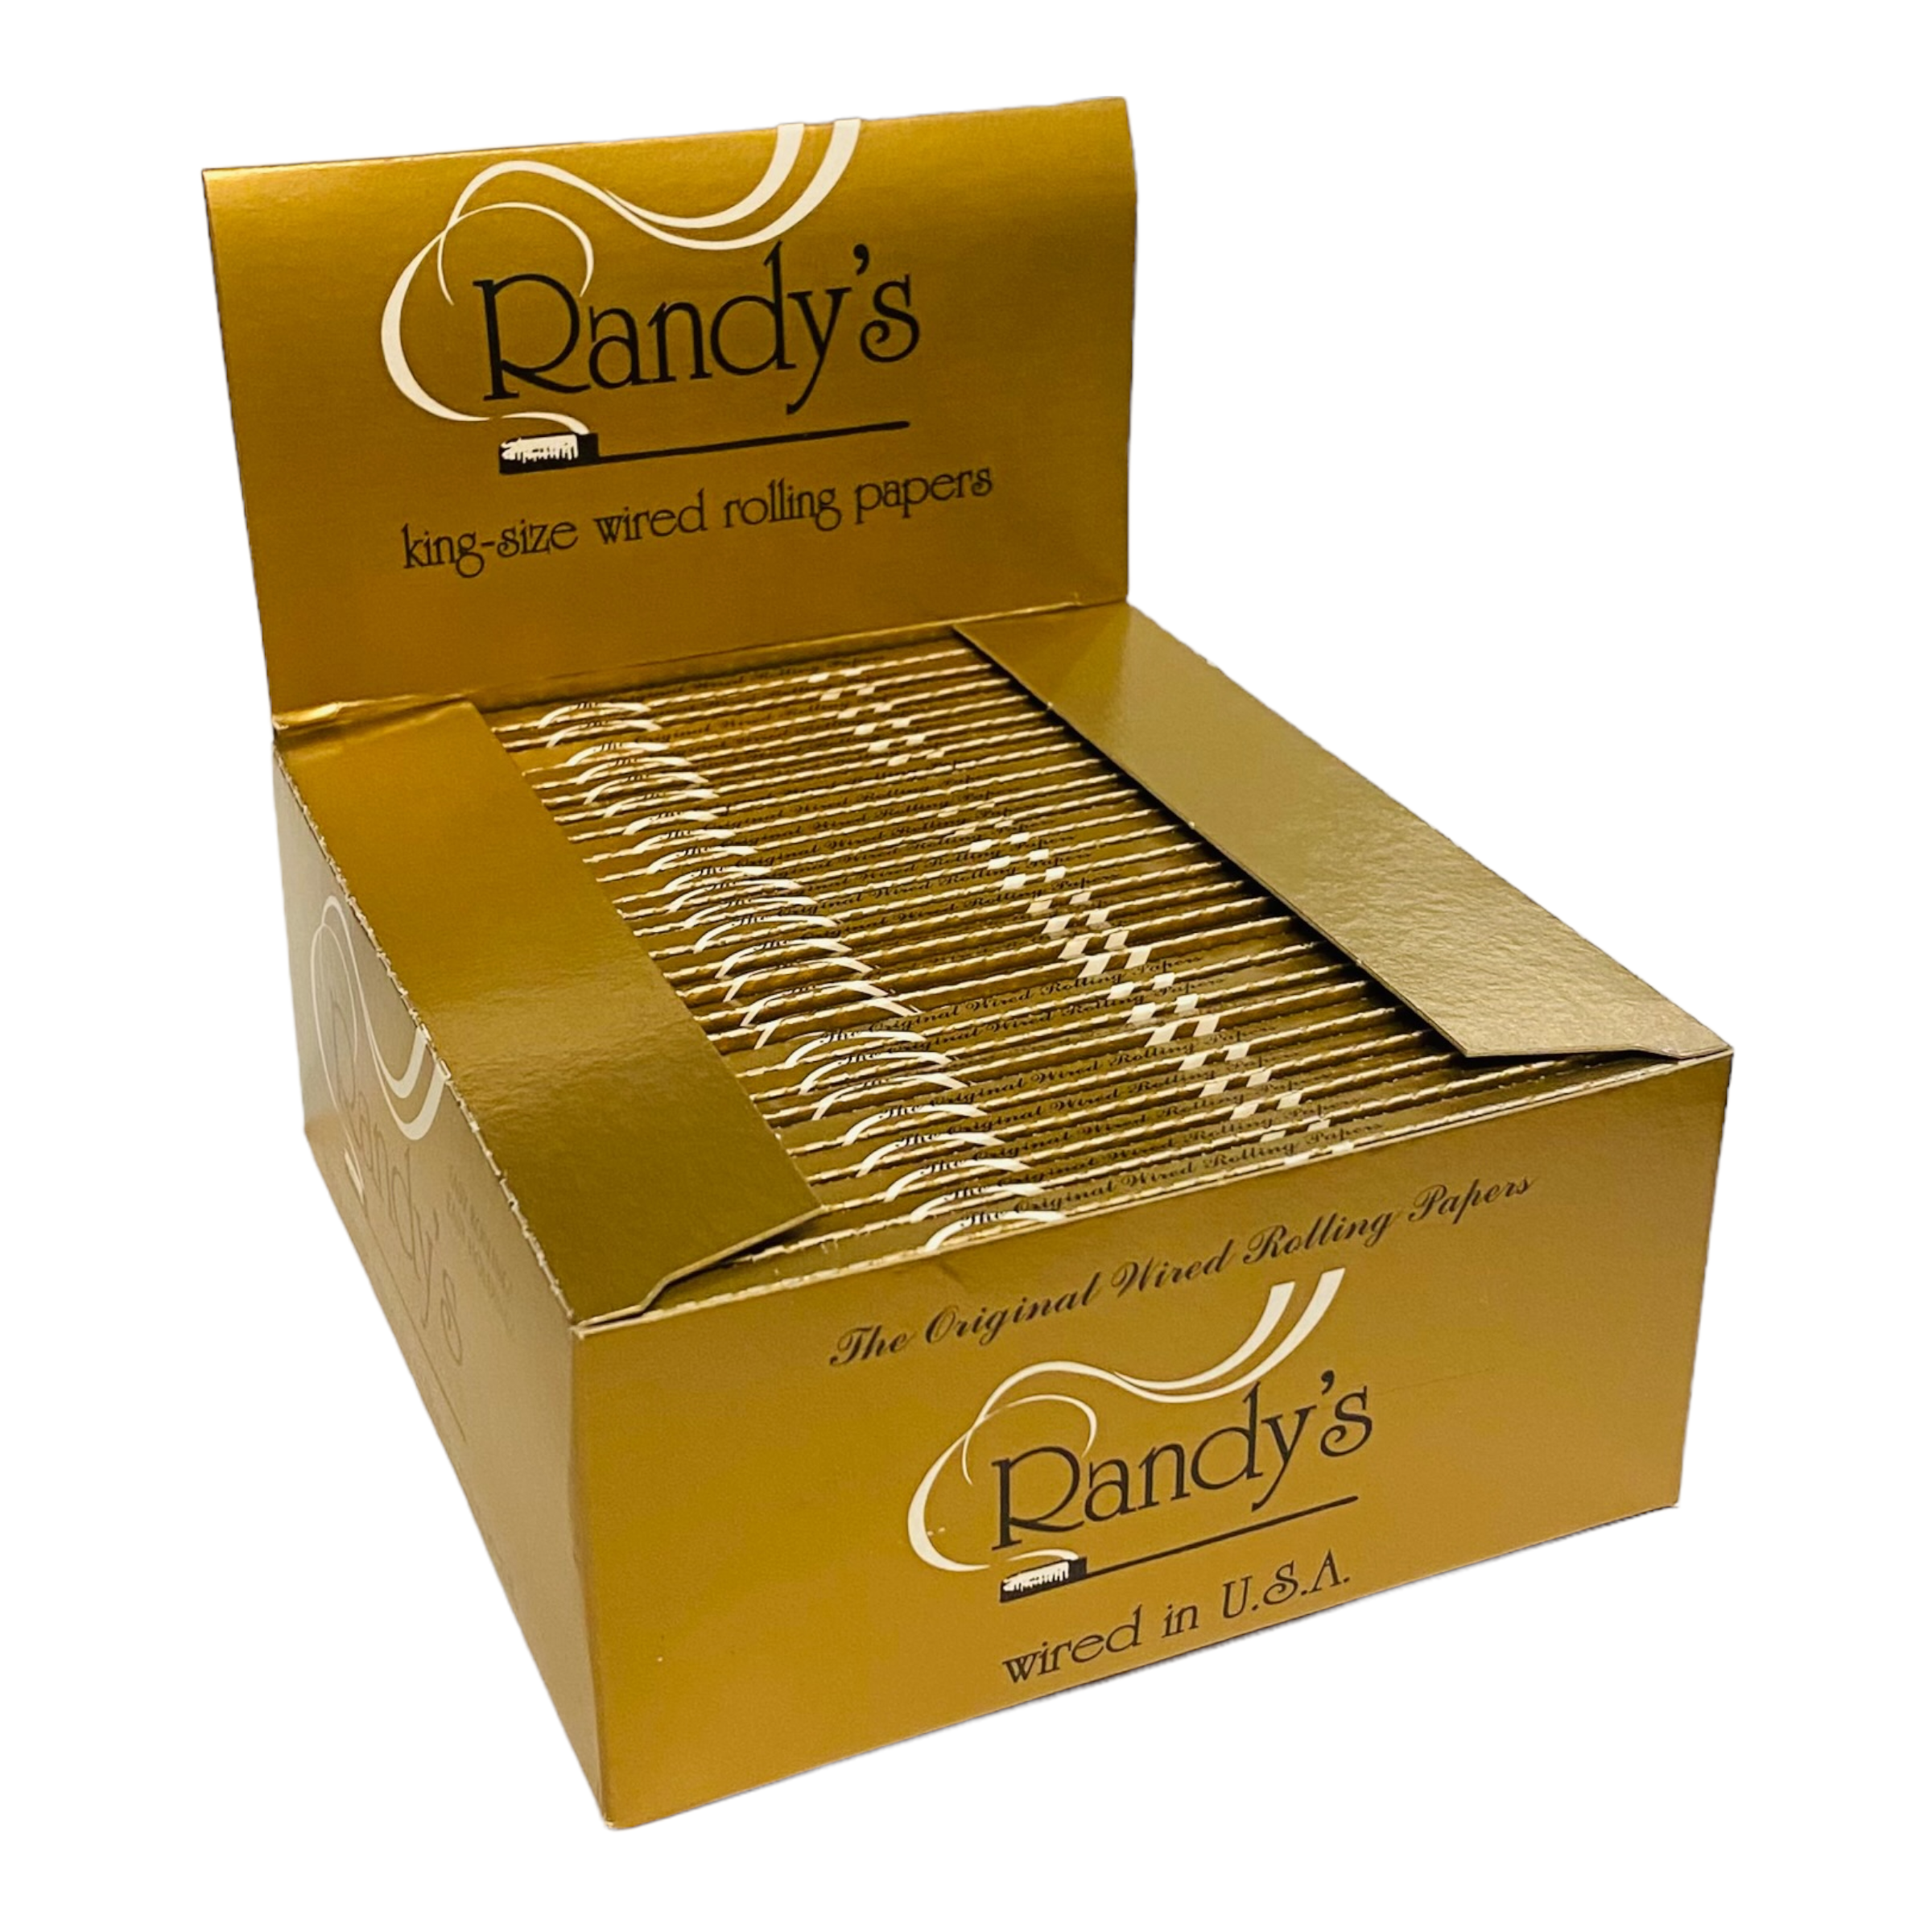 Randy's - BOX Of King Size Wired Rolling Papers - 25 Pack Box